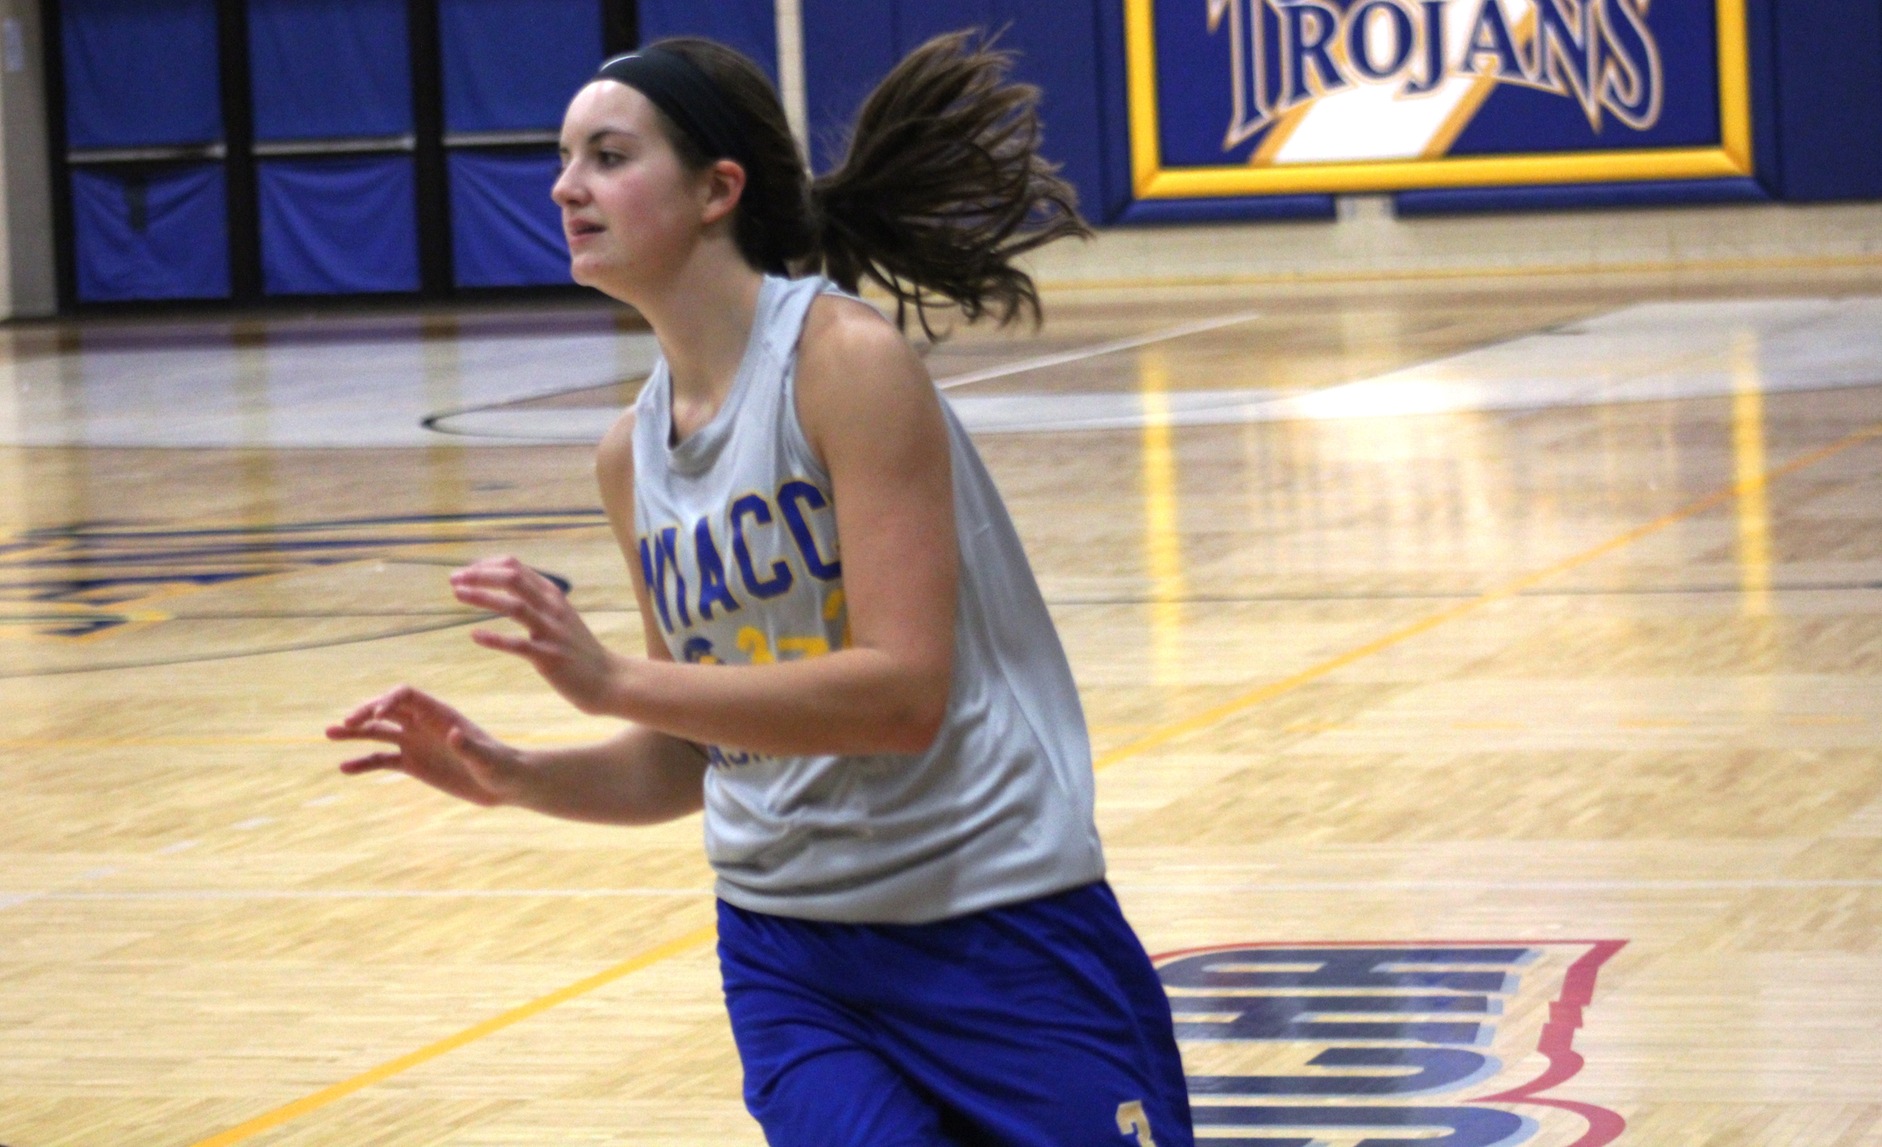 NIACC freshman Mandy Willems looks to catch a pass in a recent practice.